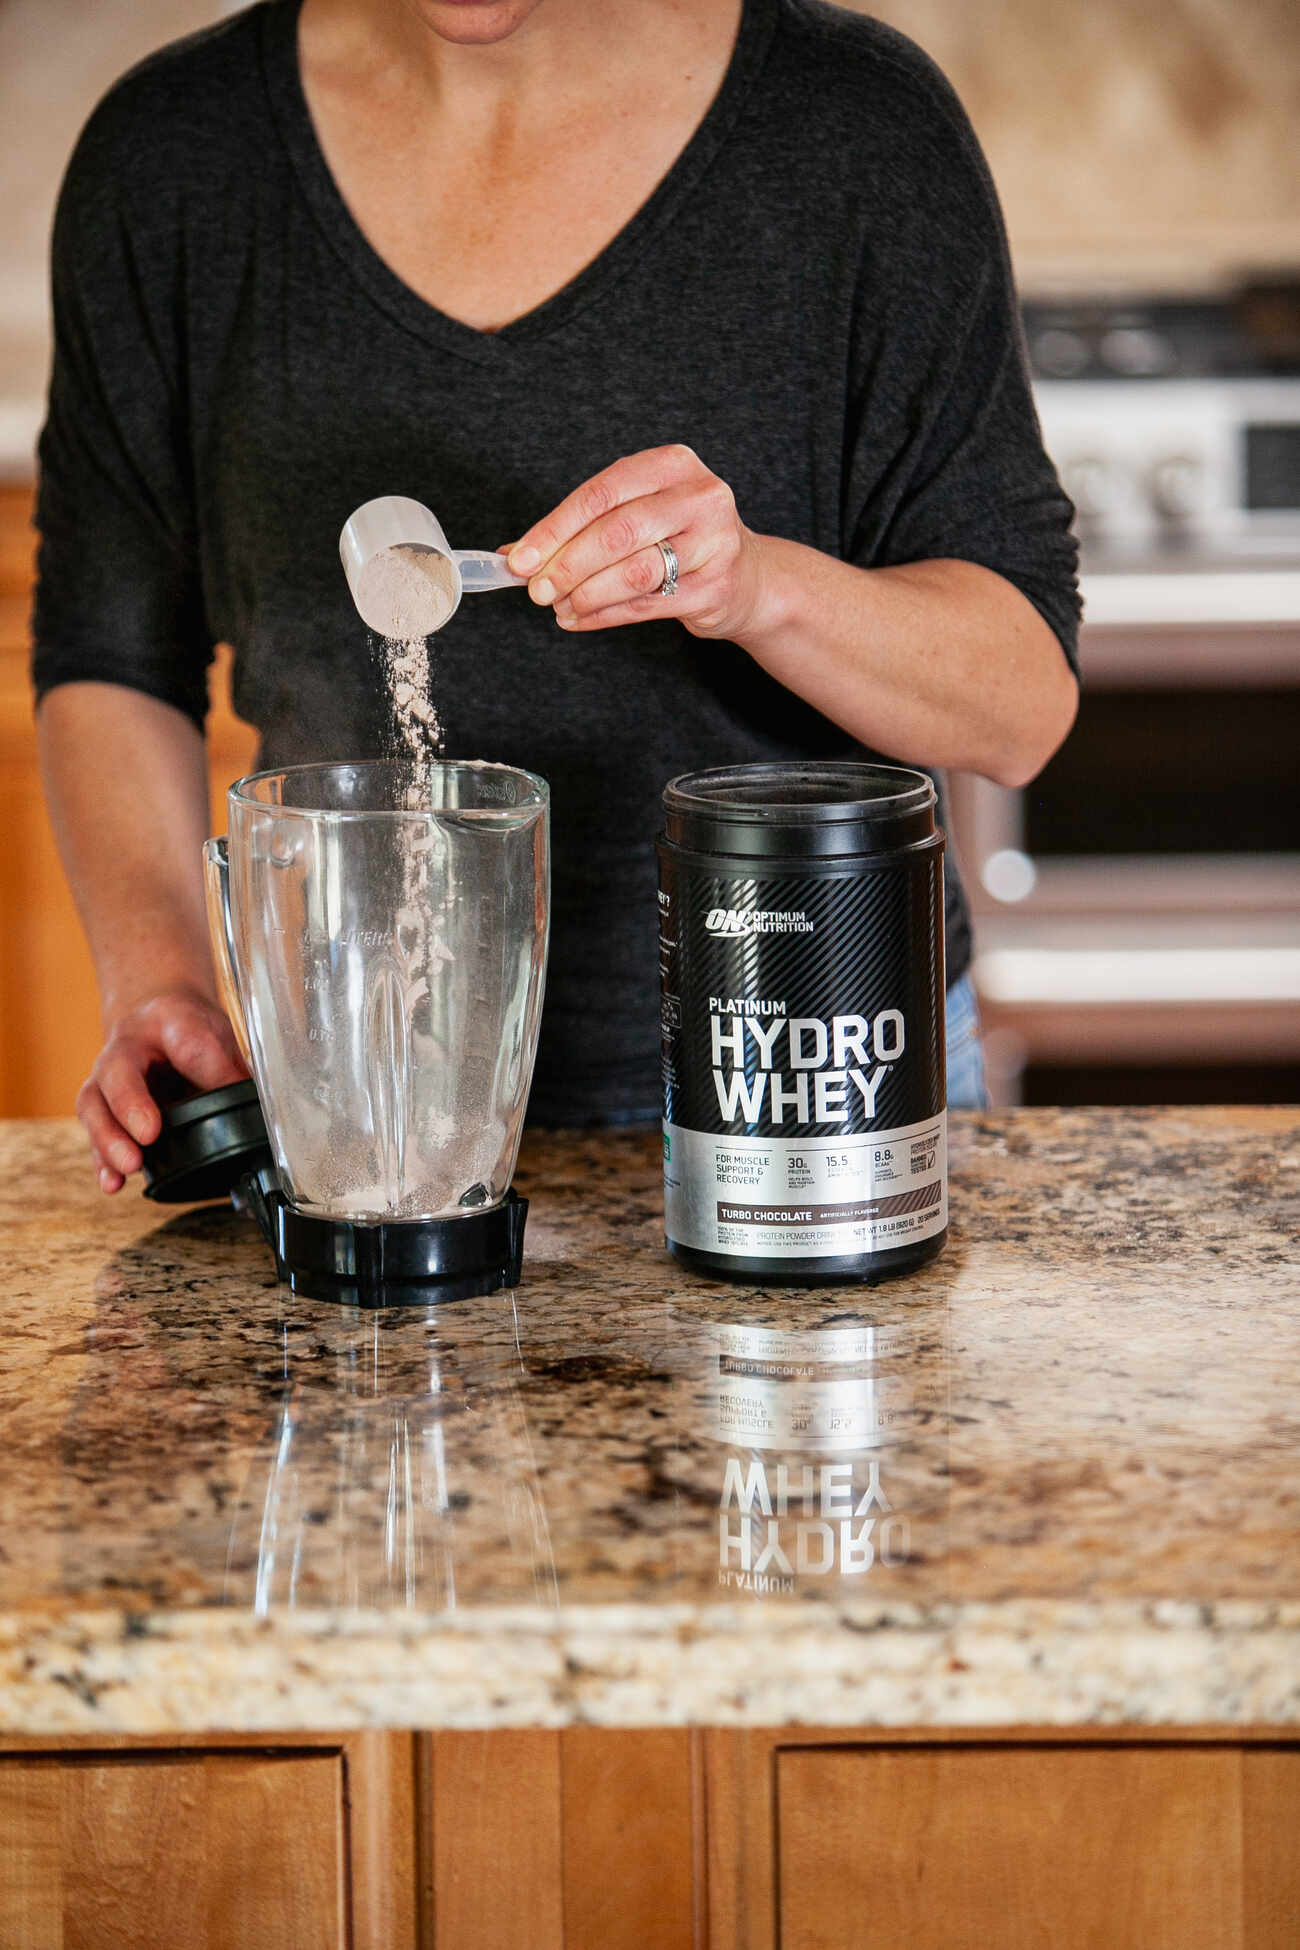 A woman pouring chocolate-flavored whey protein powder from a scoop into a blender, with the container in view